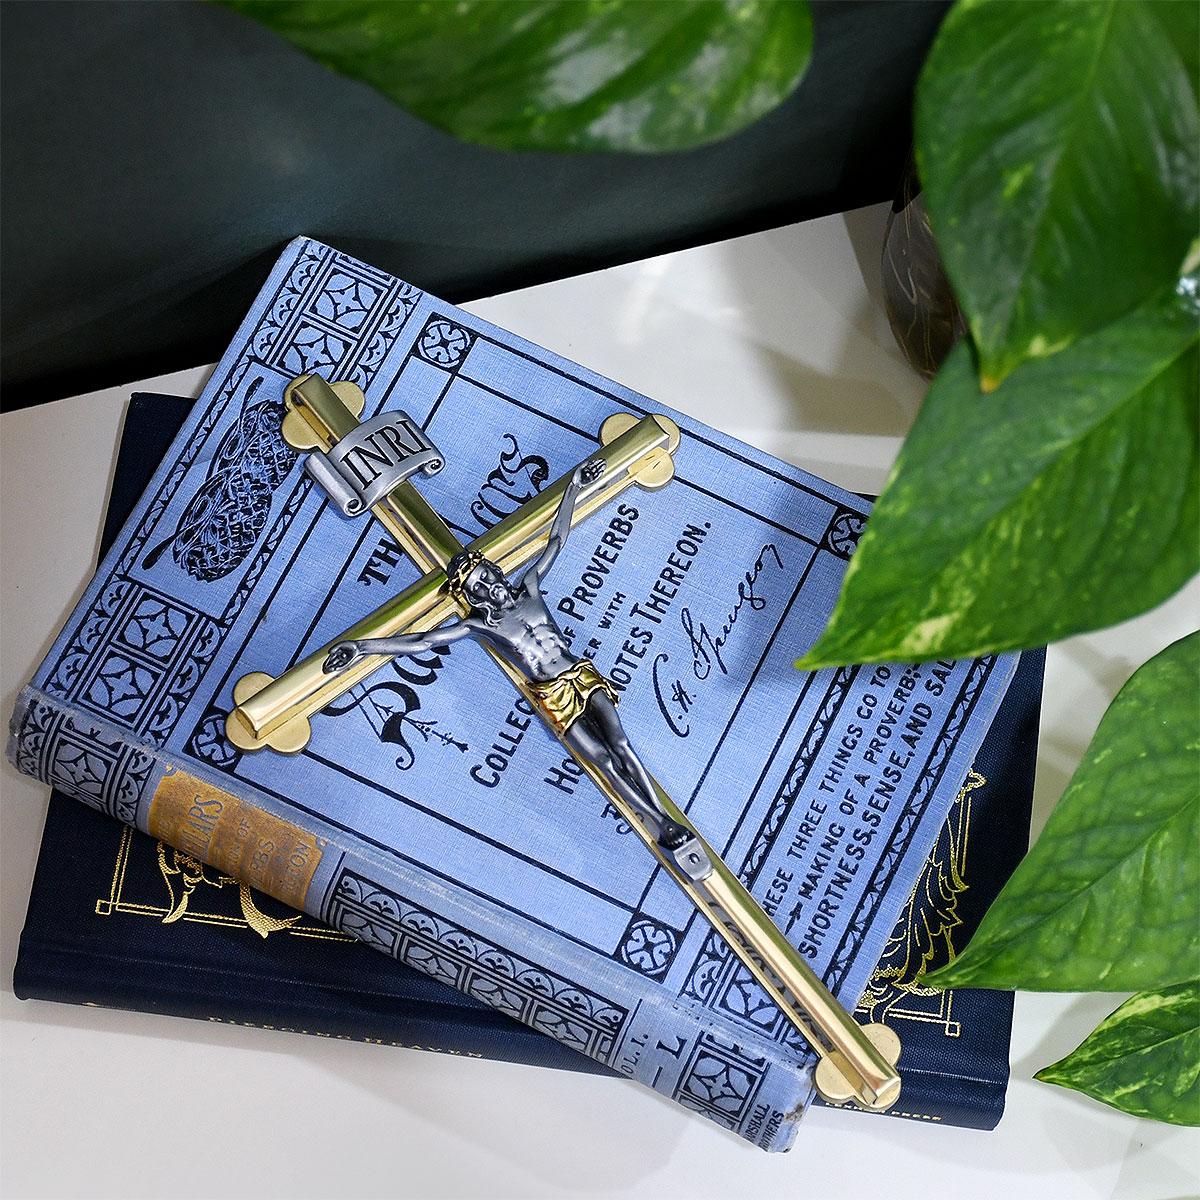 Gold And Silver Crucifix Wall Cross On Salt Cellars Collection Of Proverbs Book By Charles Spurgeon Book